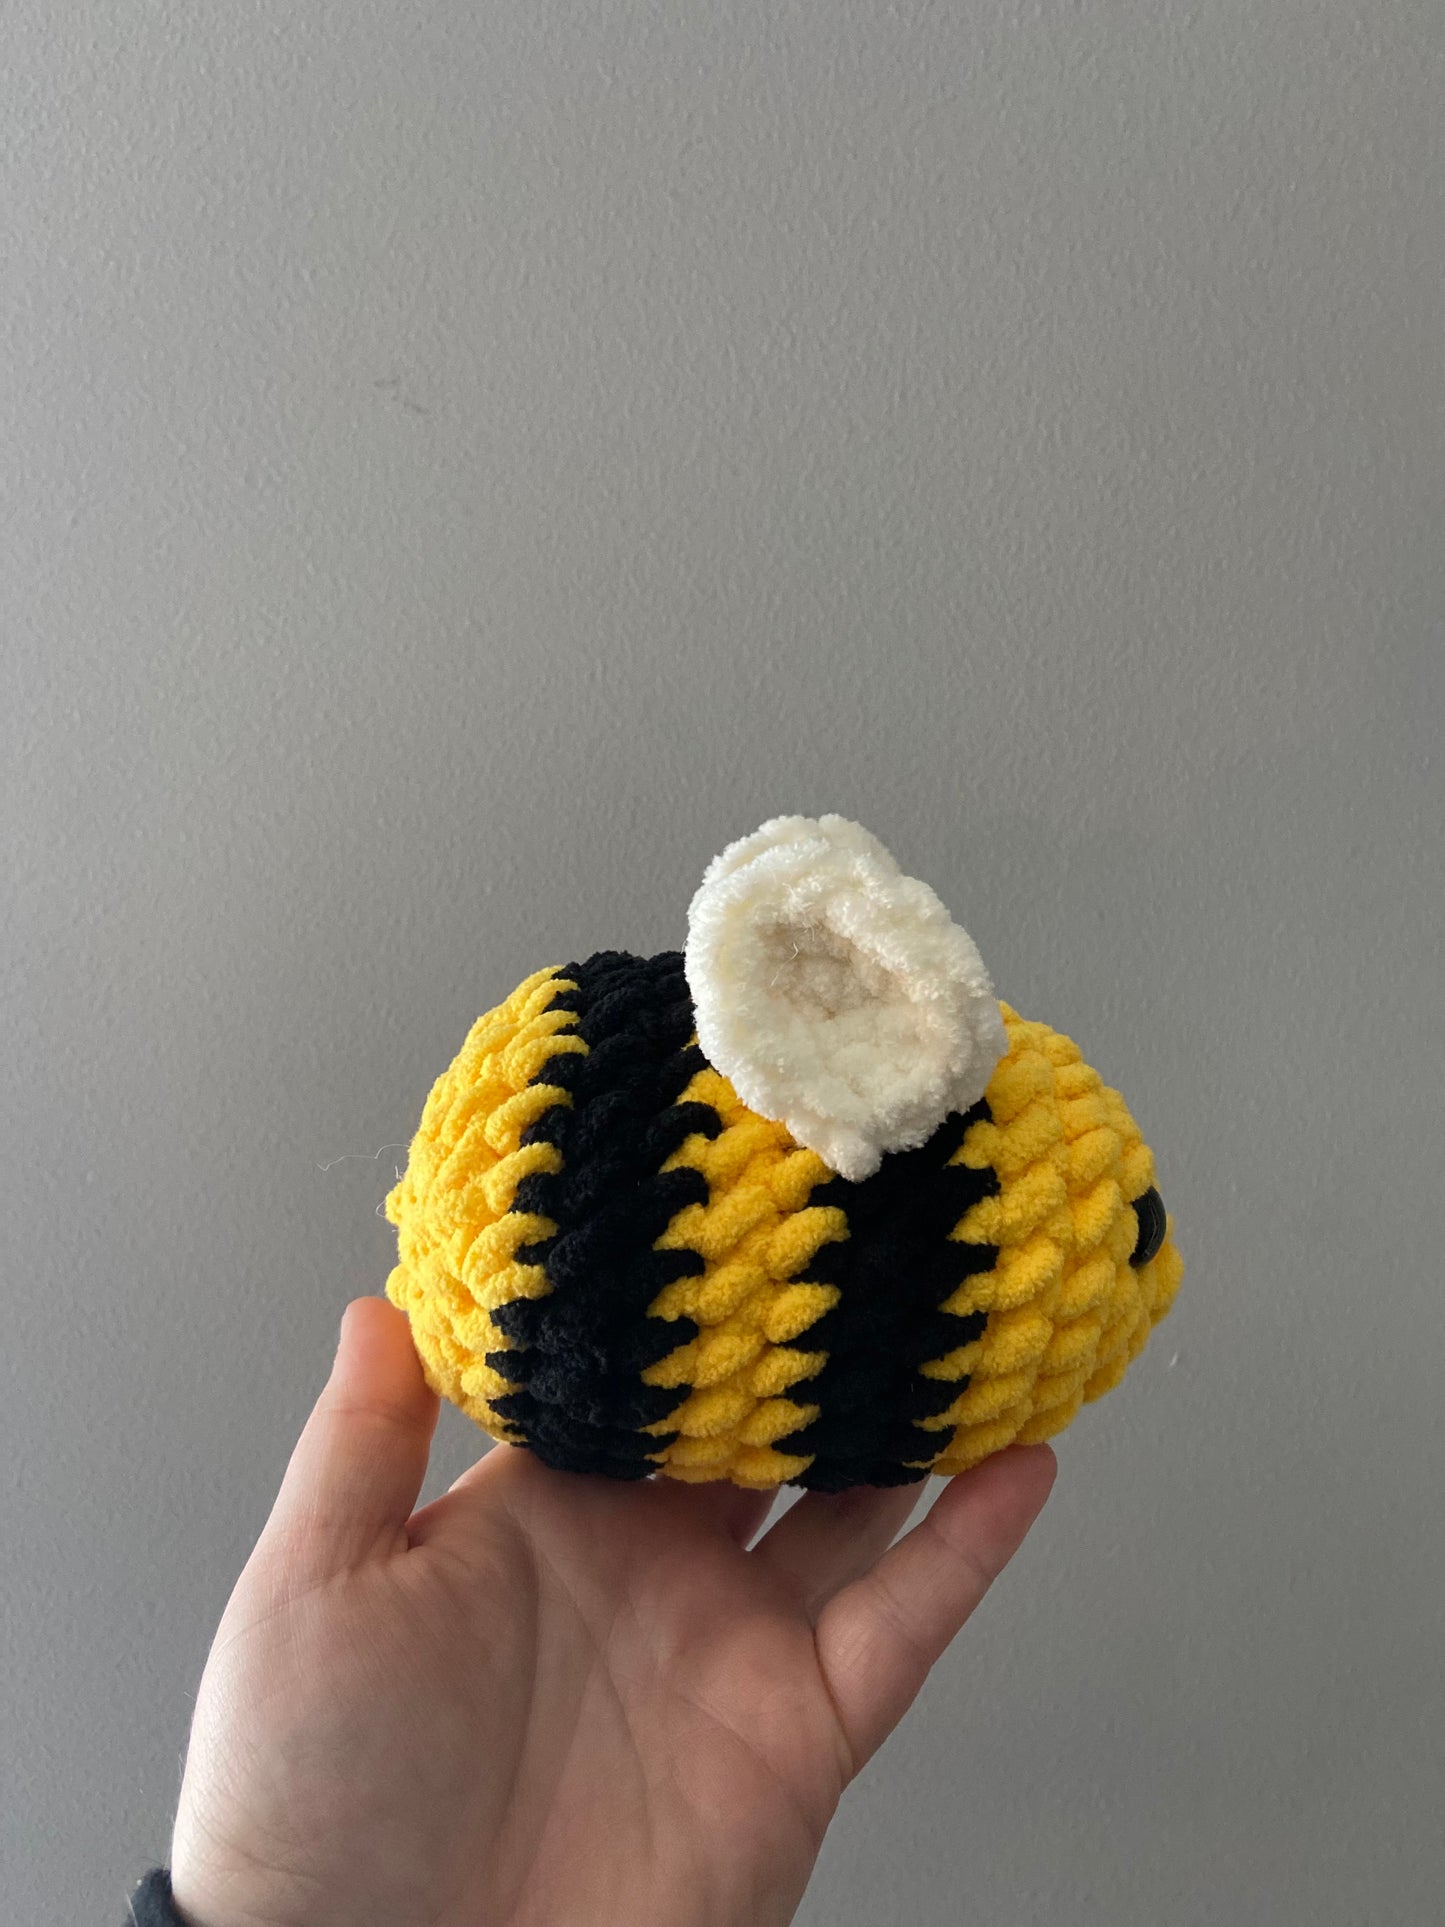 Baby bee crochet gift: A small crochet bee with yellow and black stripes, soft wings, and a sweet smile, perfect for gifting to a newborn or young child.